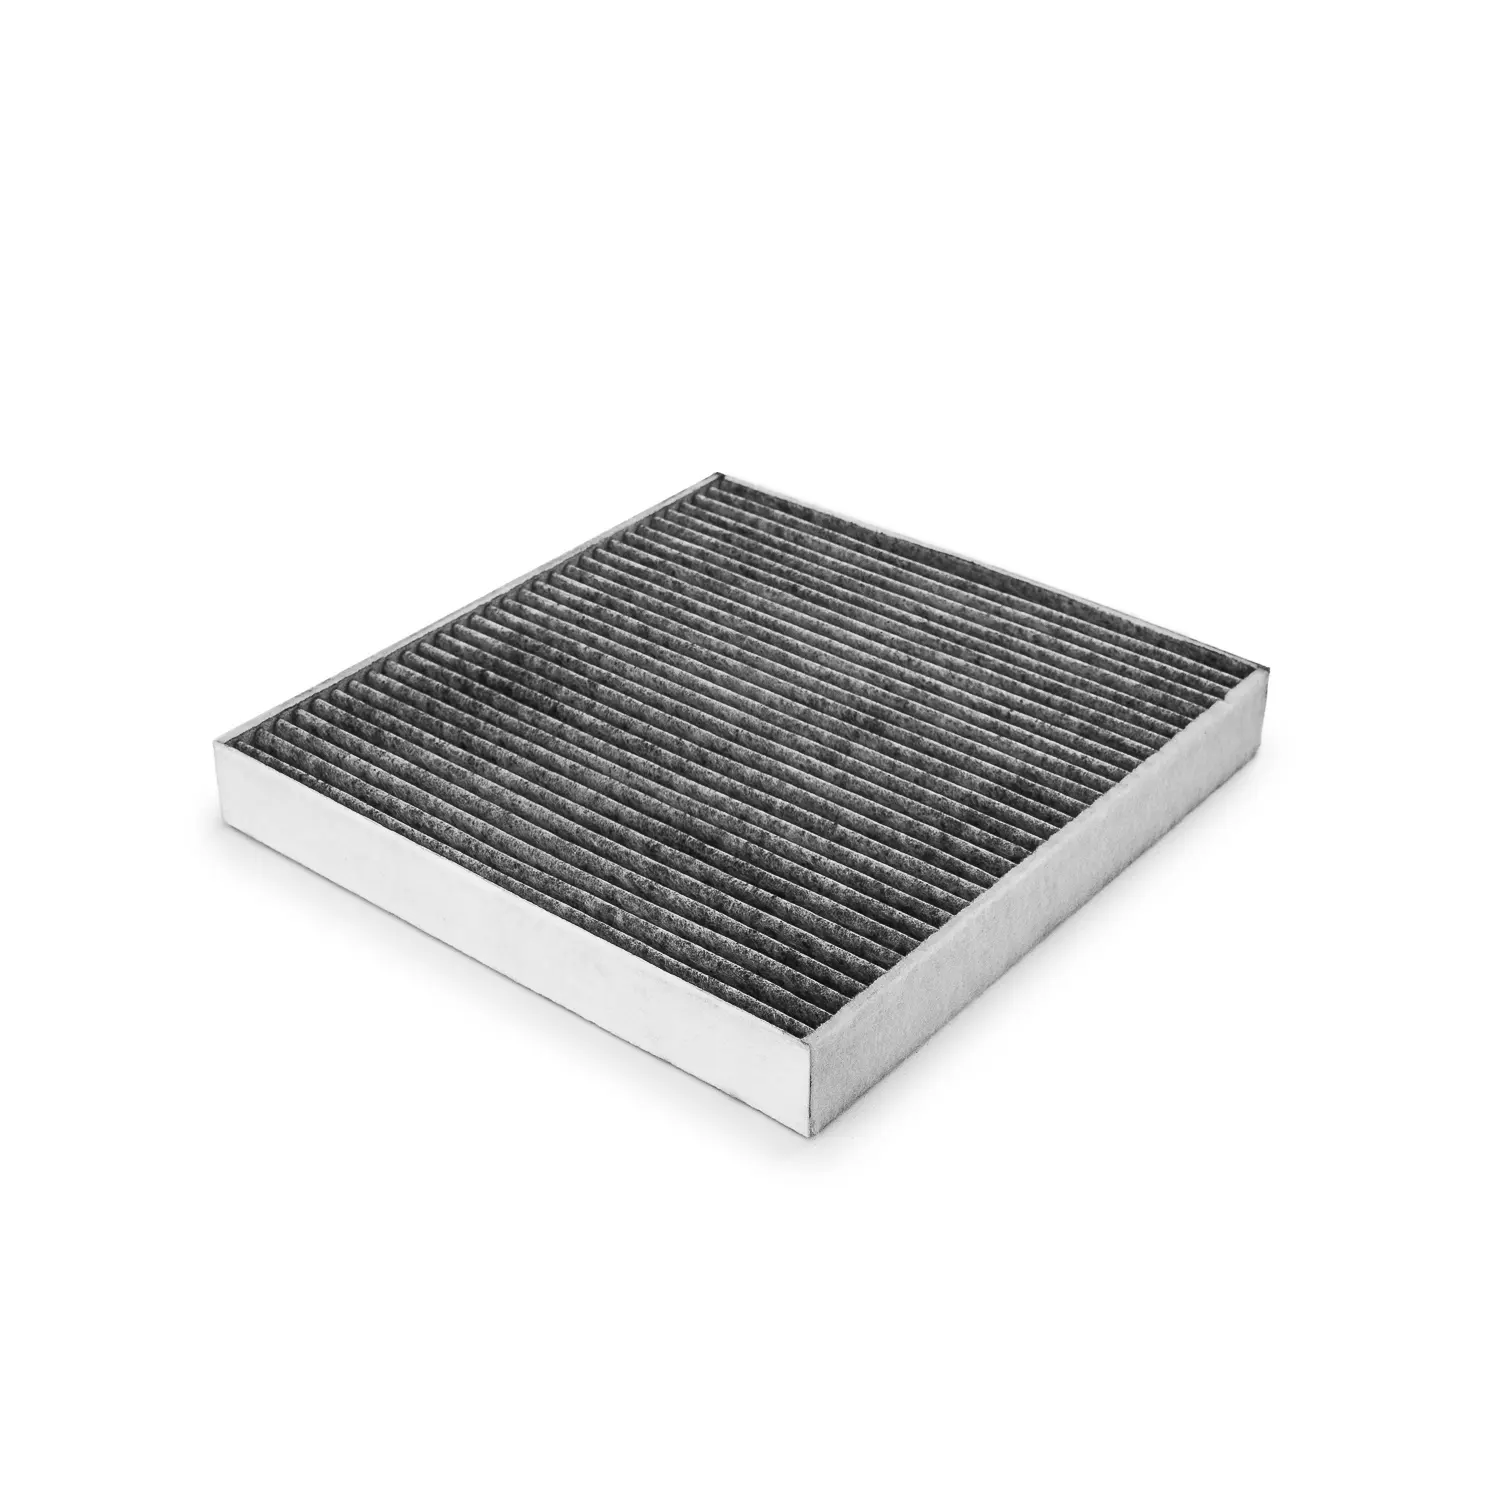 Superior In-Car Air Quality Filter - UFI Filters 54.219.00 - Your Defense Against In-Car Pollutants and Allergies